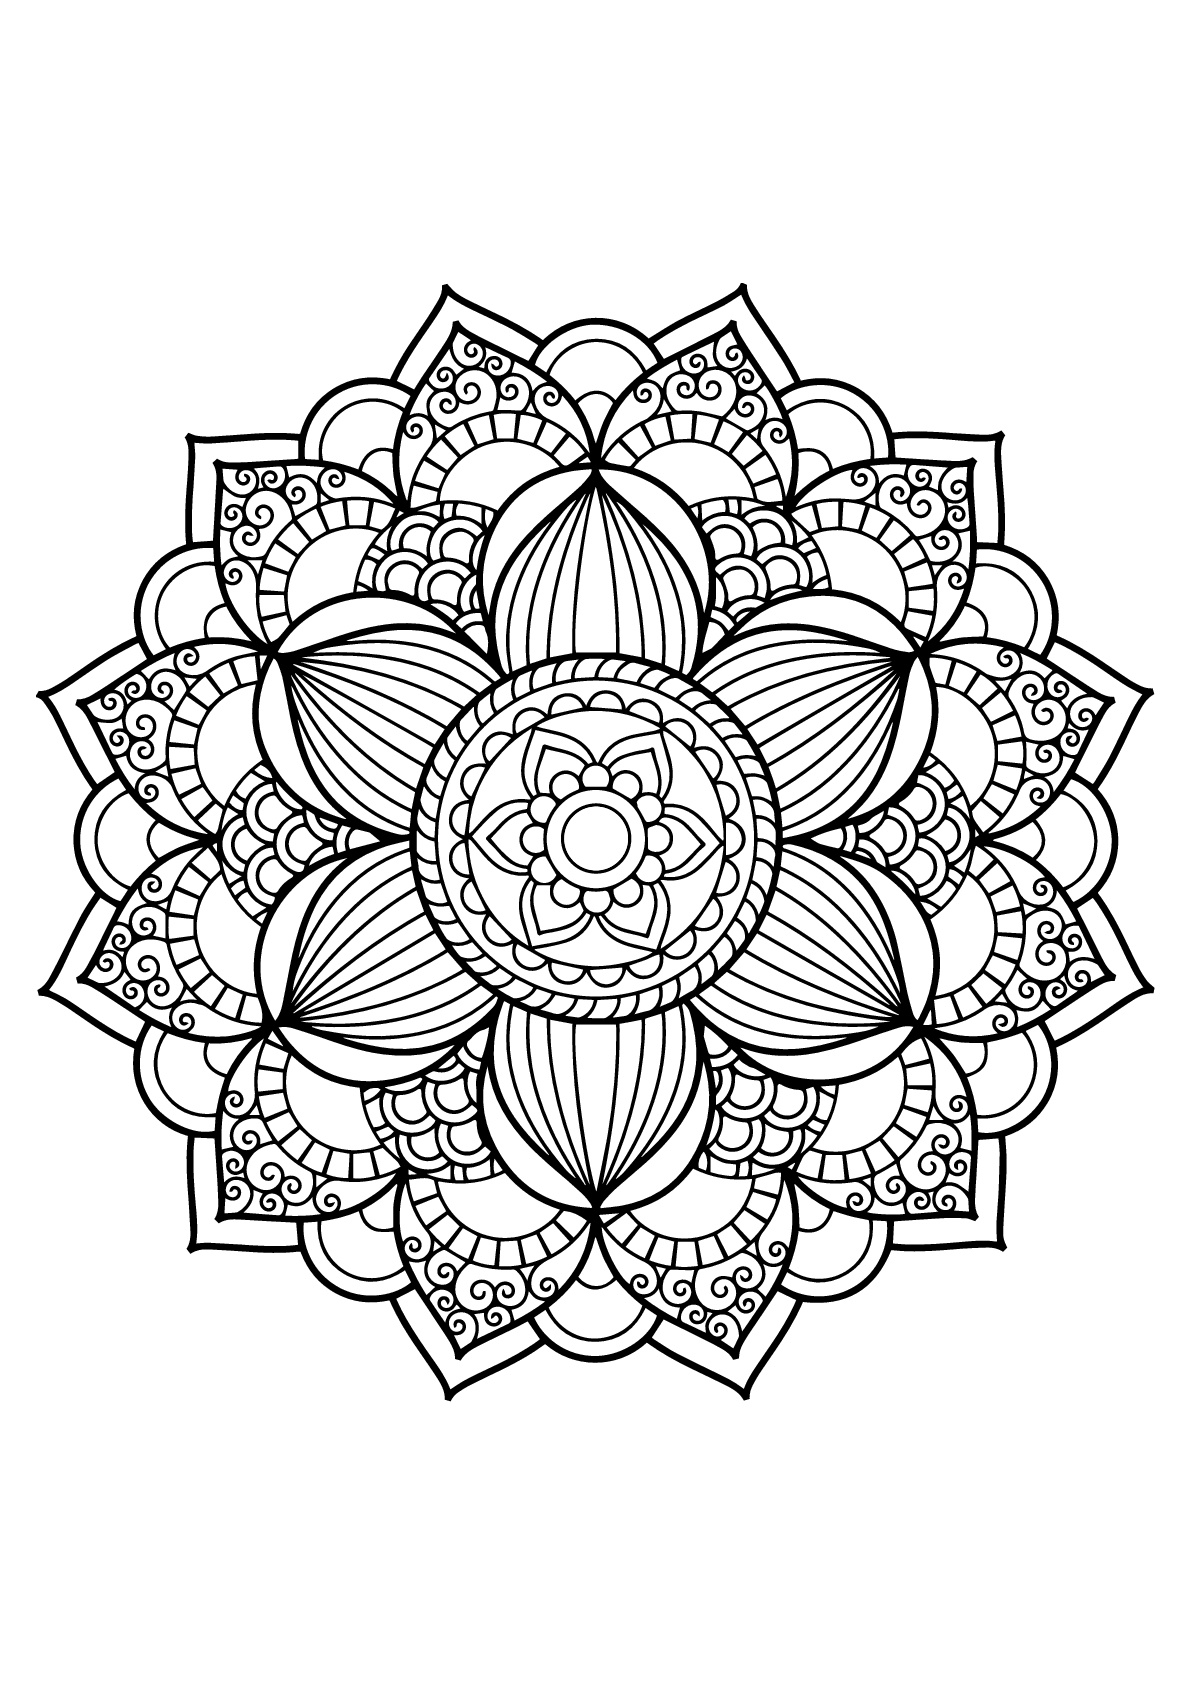 Mandala from Free Coloring book for adults